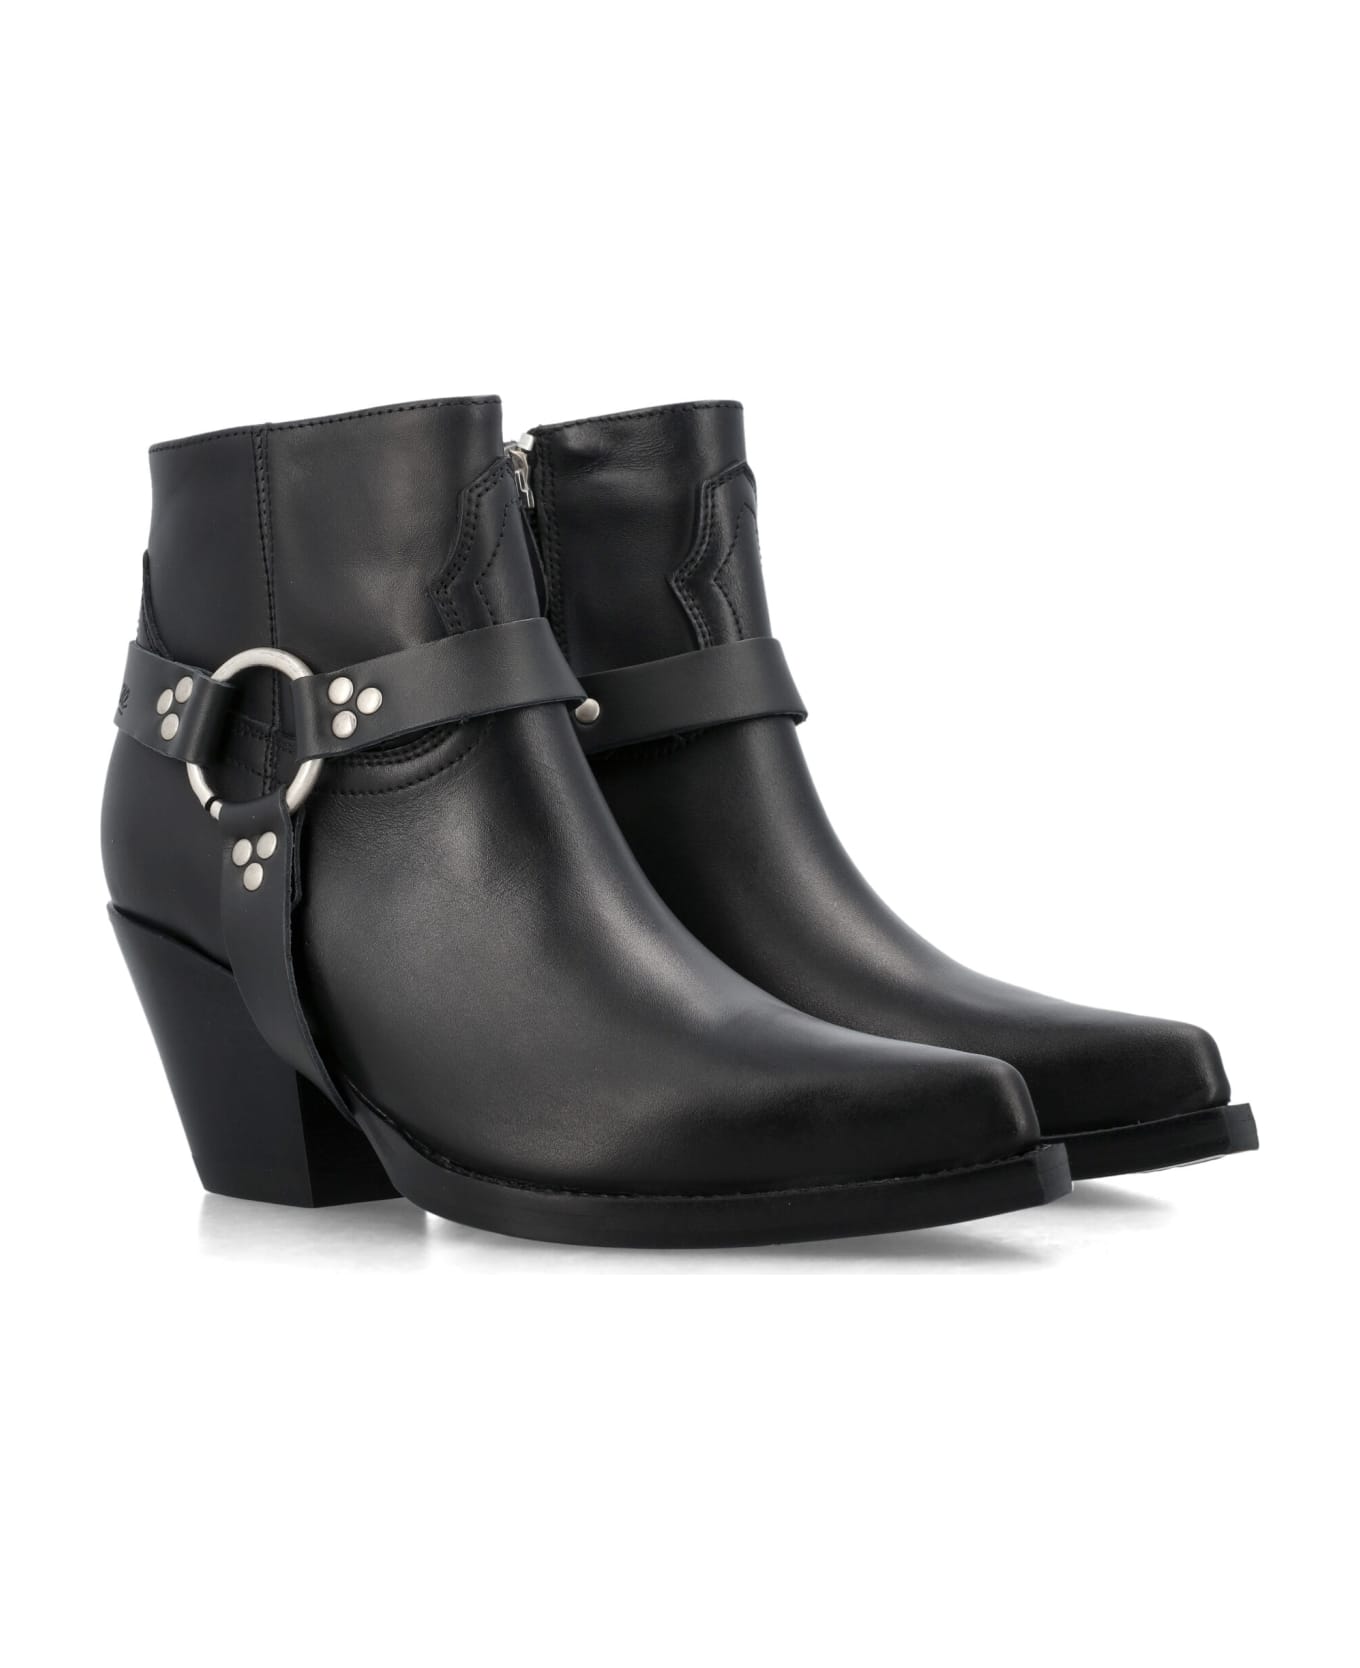 Sonora Jalapeno Belt Ankle Boots - BLACK ブーツ